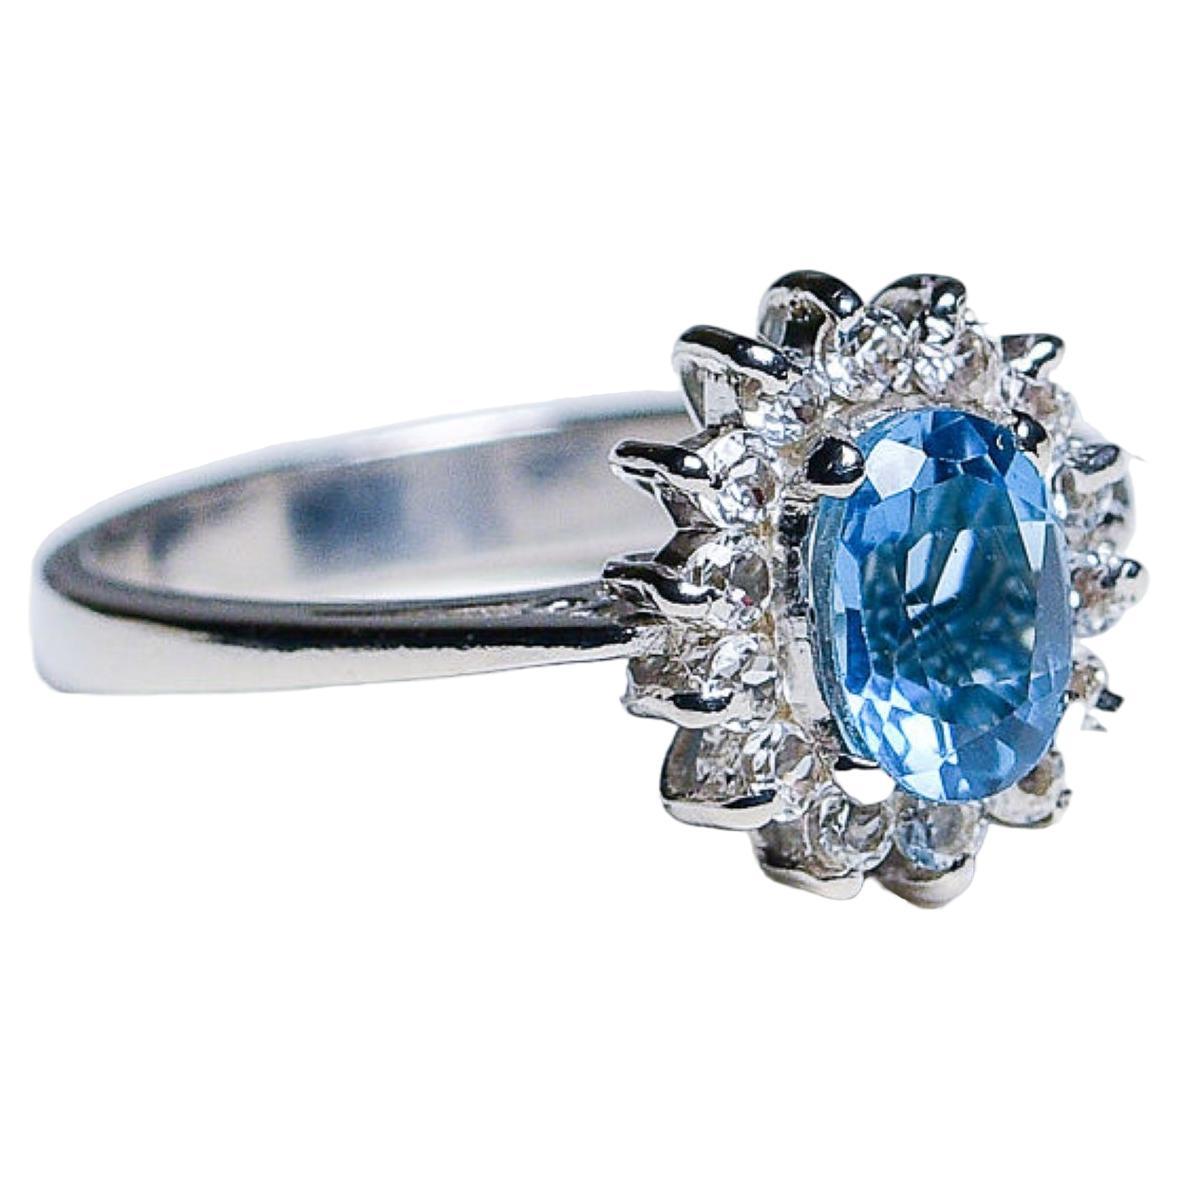 Introducing our 1ct Oval Blue Topaz Platinum Silver Ring, a stunning piece that exudes style and sophistication. This ring features a mesmerizing 1ct Oval Blue Topaz at its center, known for its captivating blue hue and exceptional clarity.

The